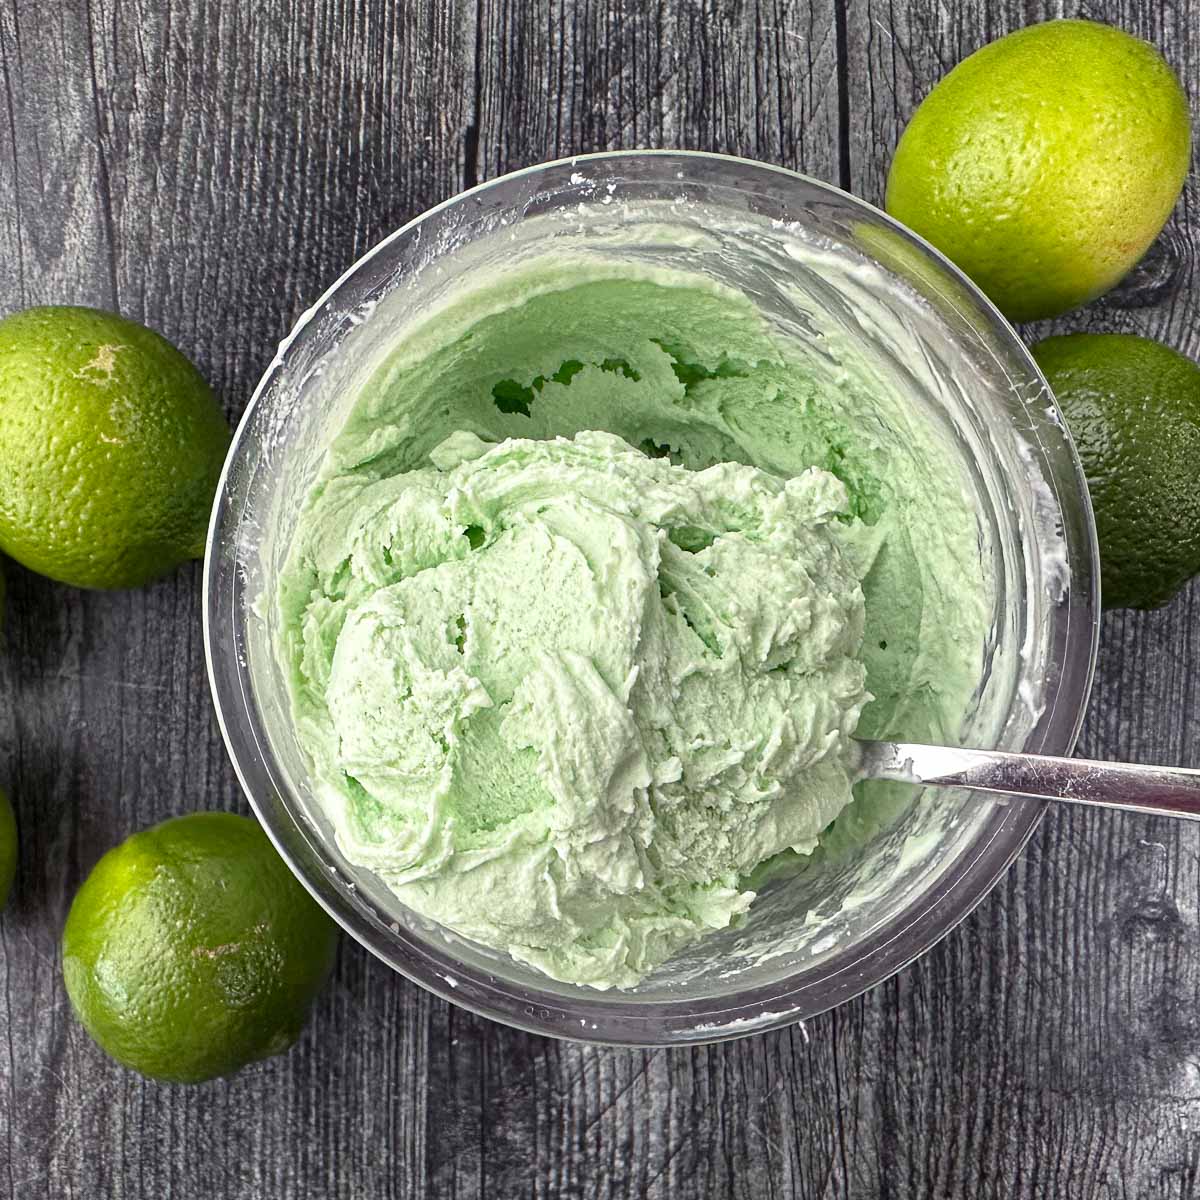 aerial view of a pint container with Ninja cream keto coconut lime ice cream and few fresh limes